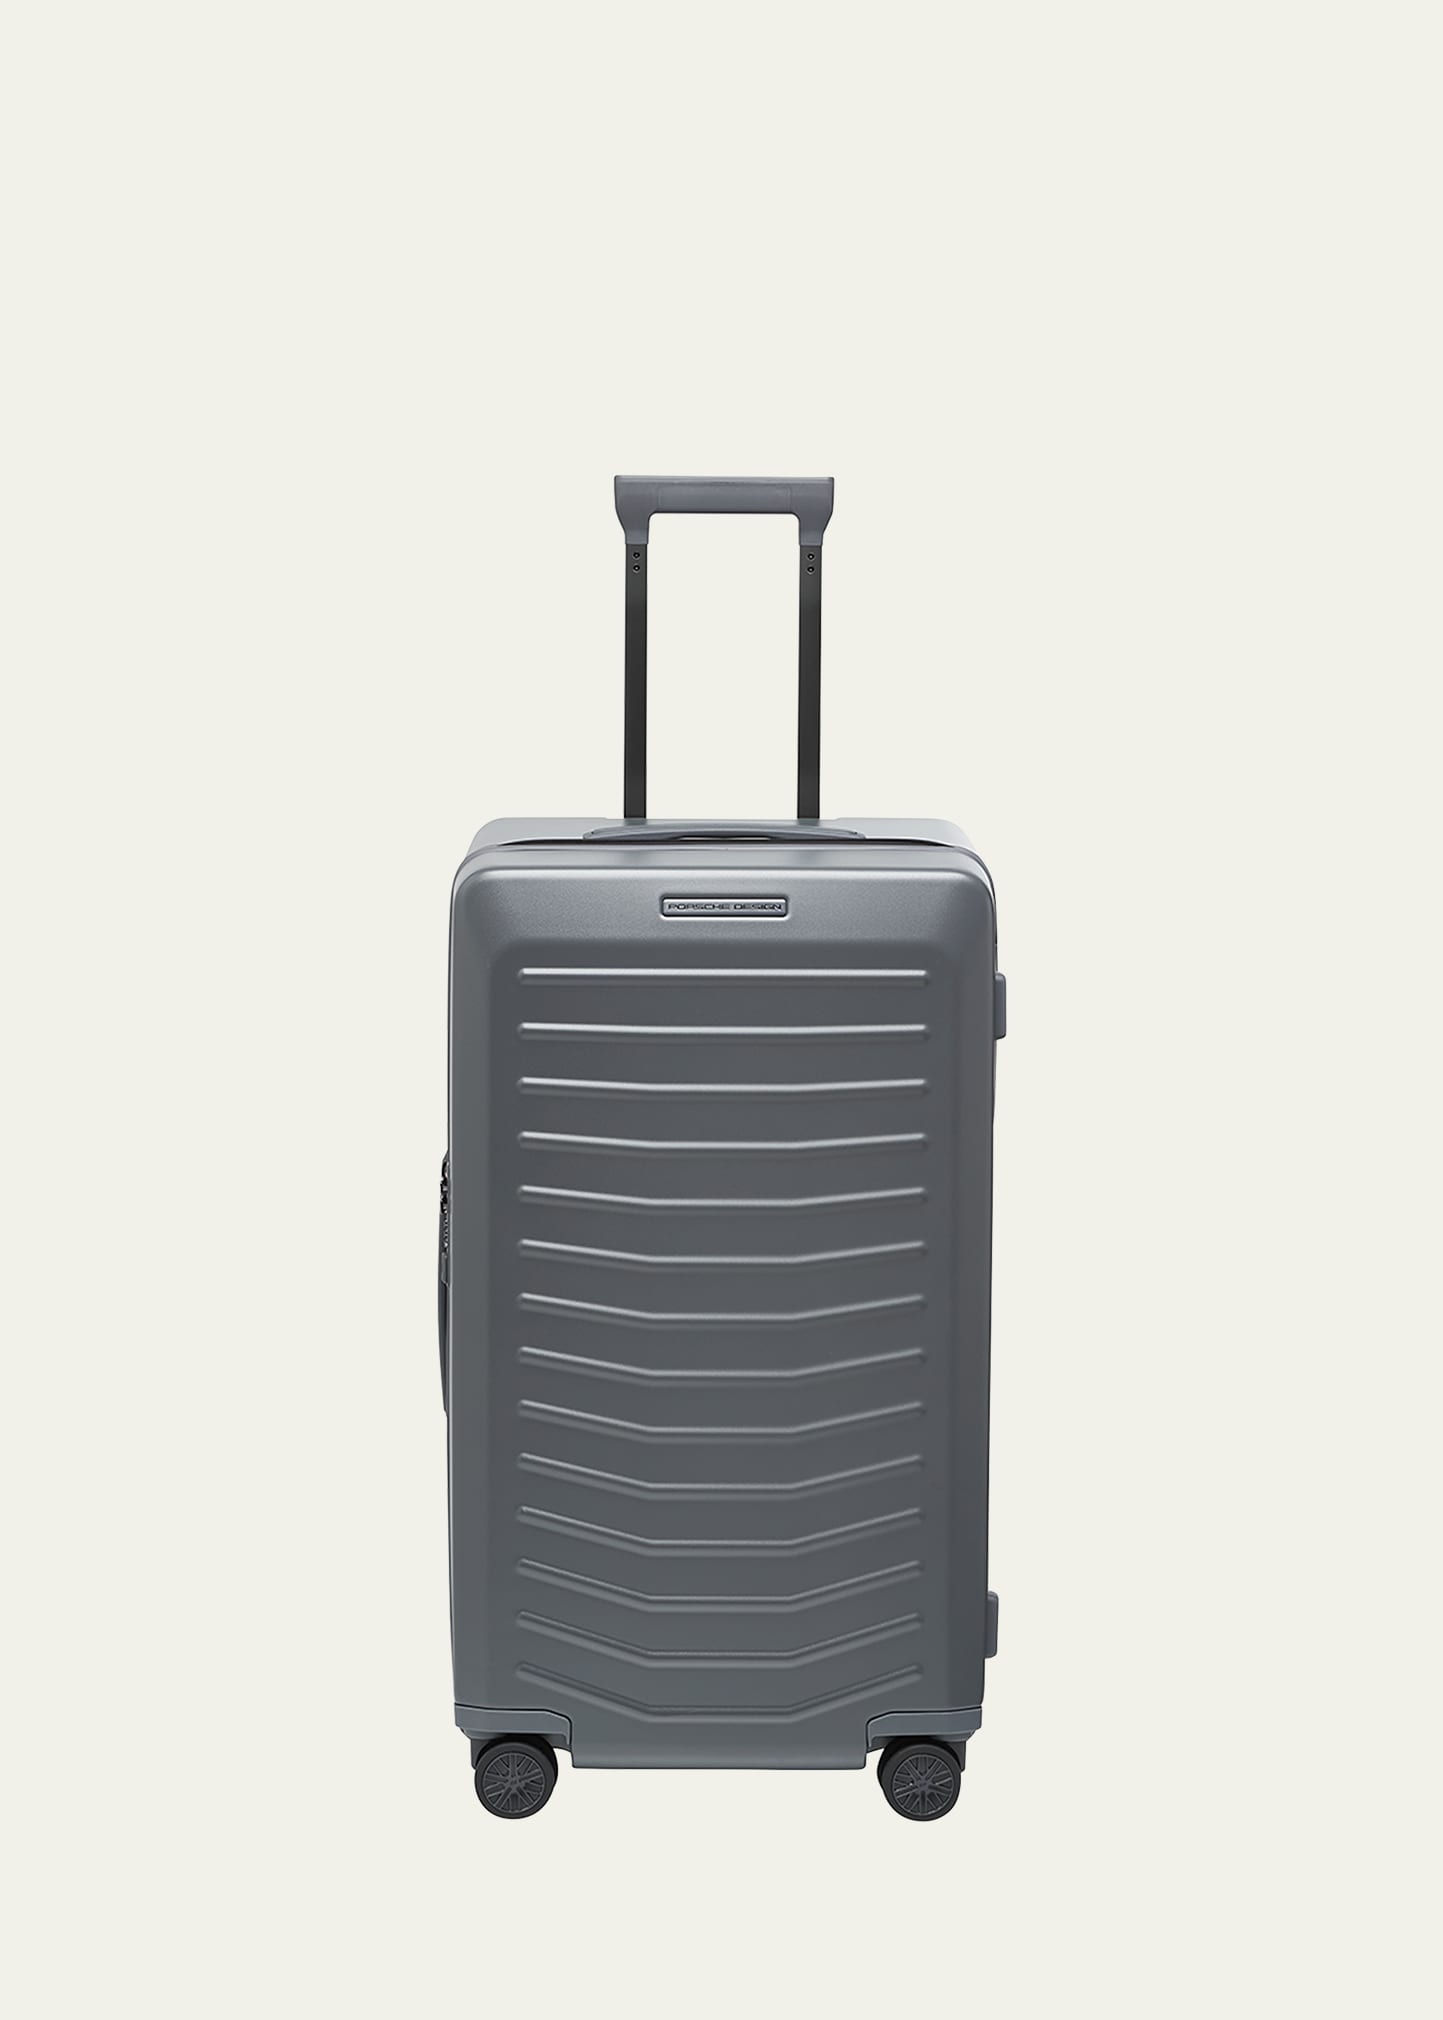 Roadster 29" Trunk Spinner Luggage